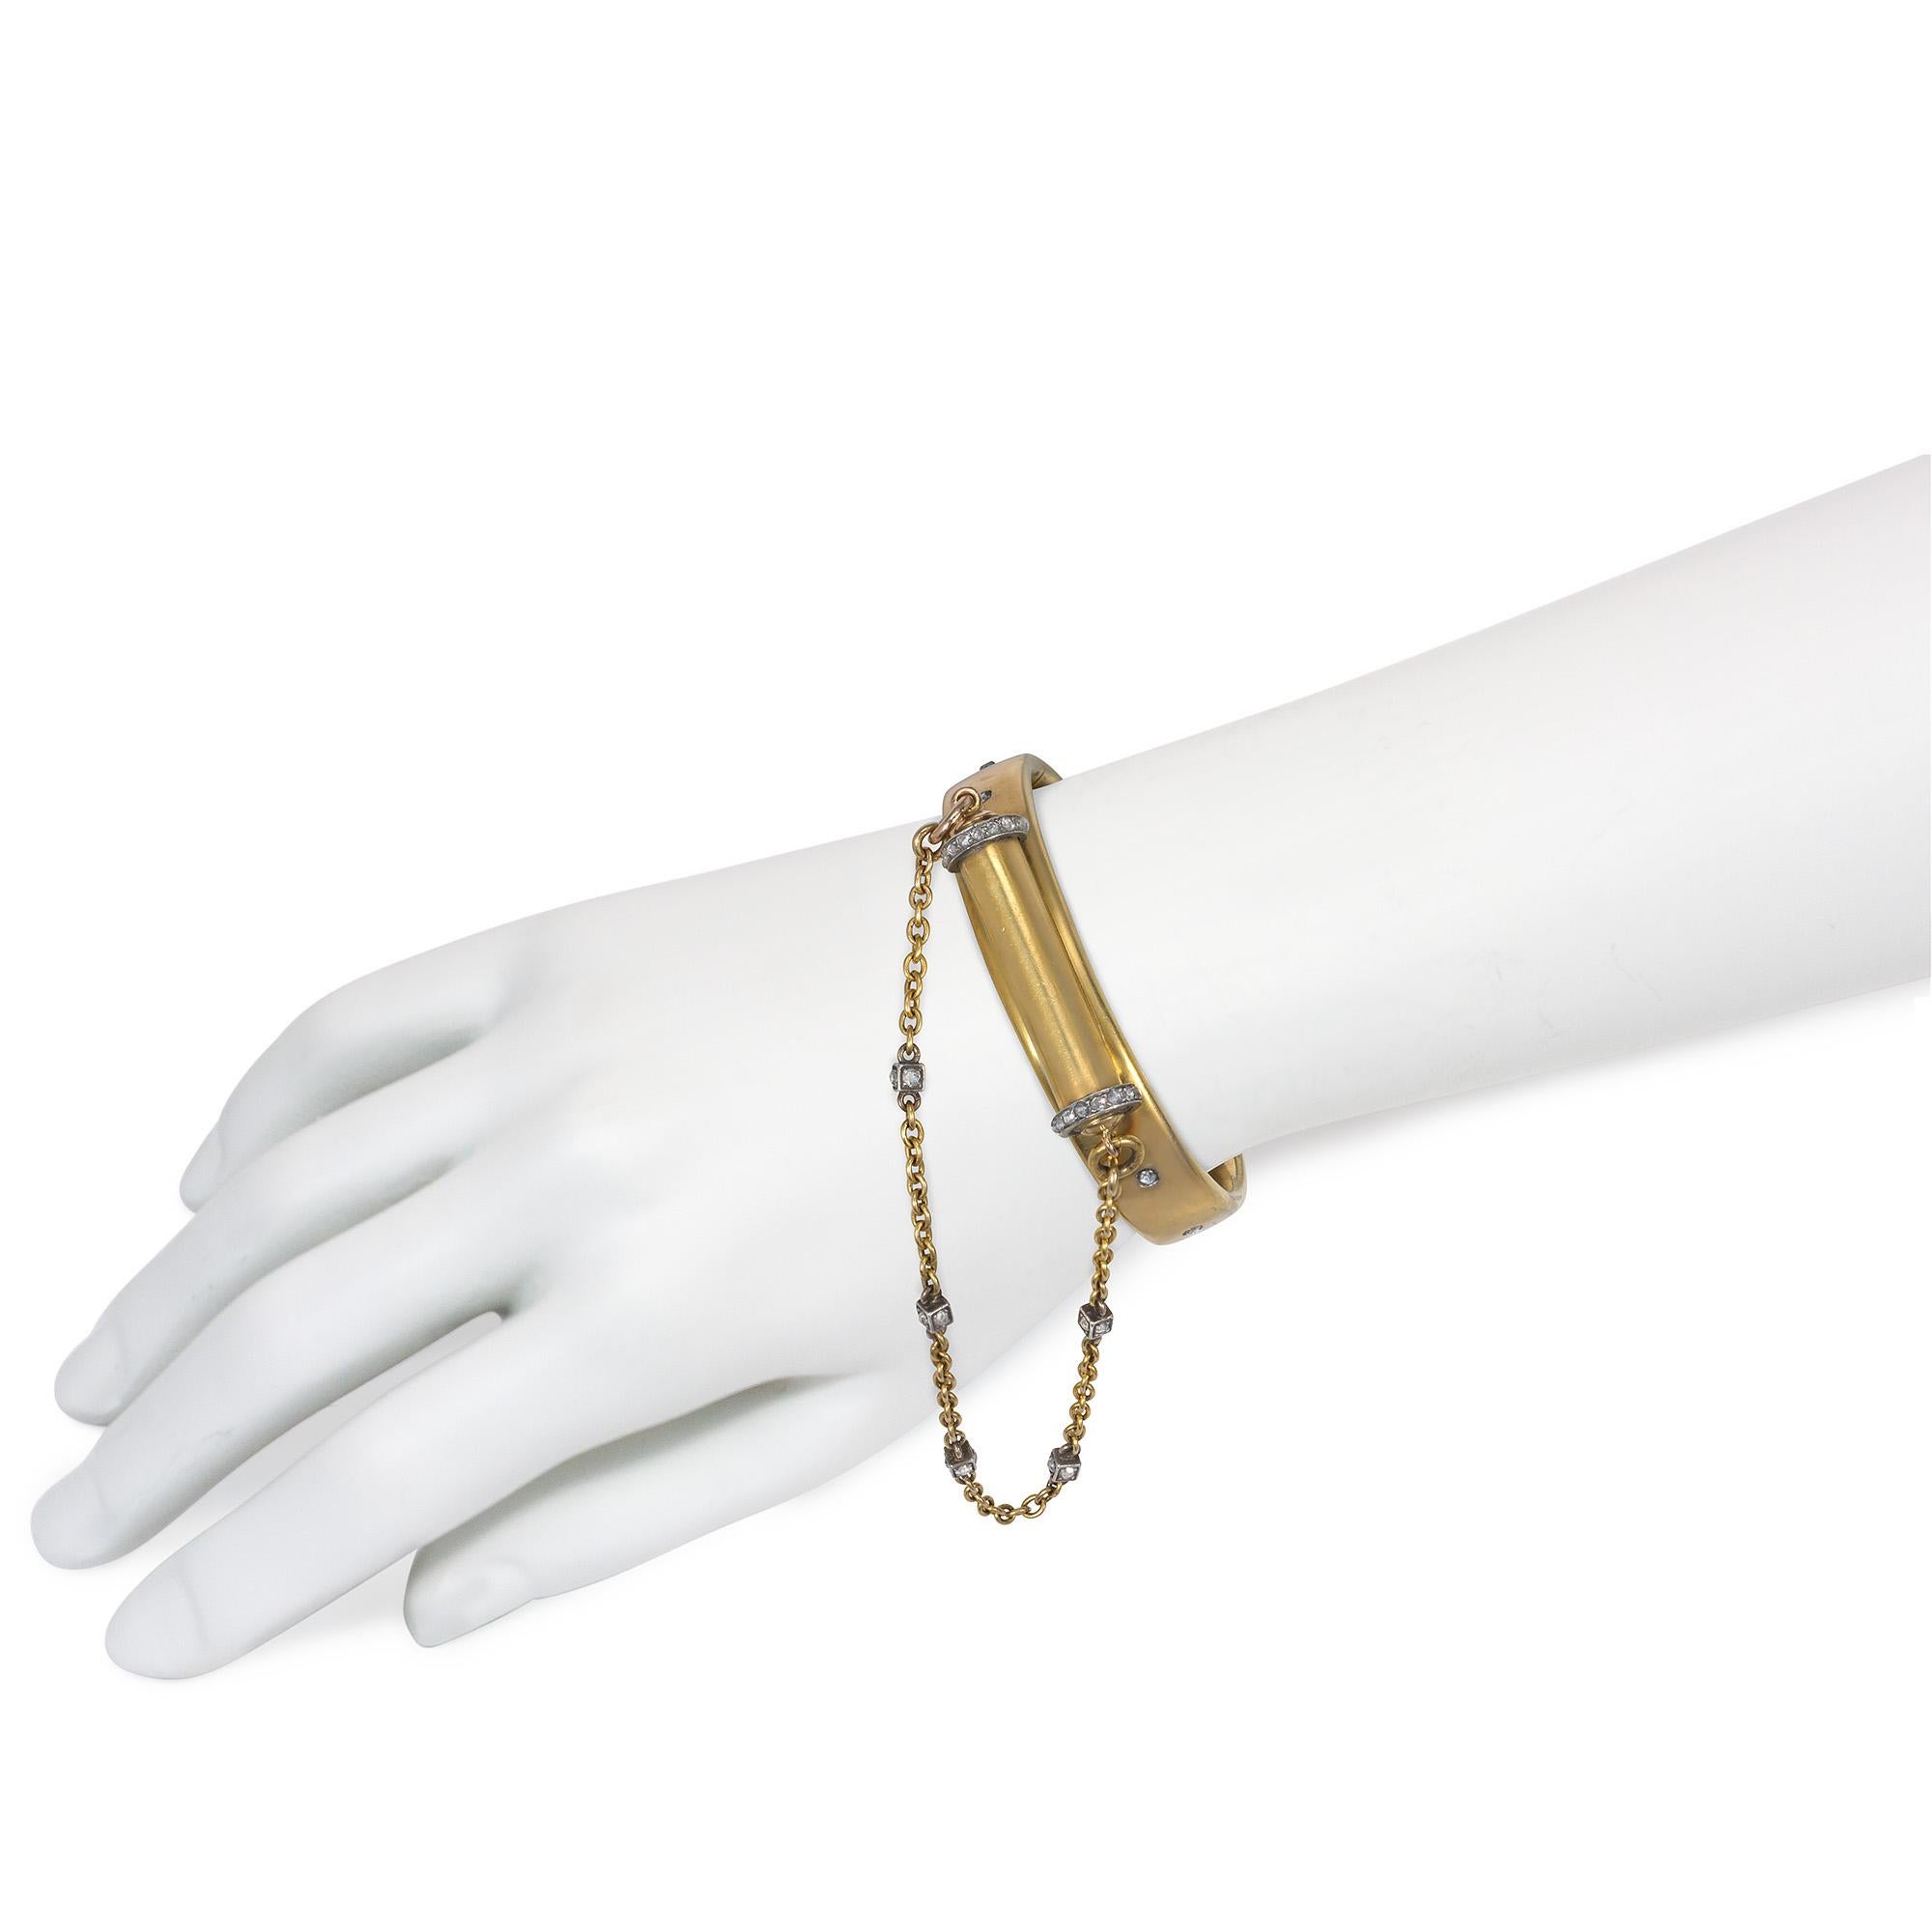 Antique Victorian Gold and Diamond Cuff Bracelet Concealing a Mechanical Pencil In Good Condition For Sale In New York, NY